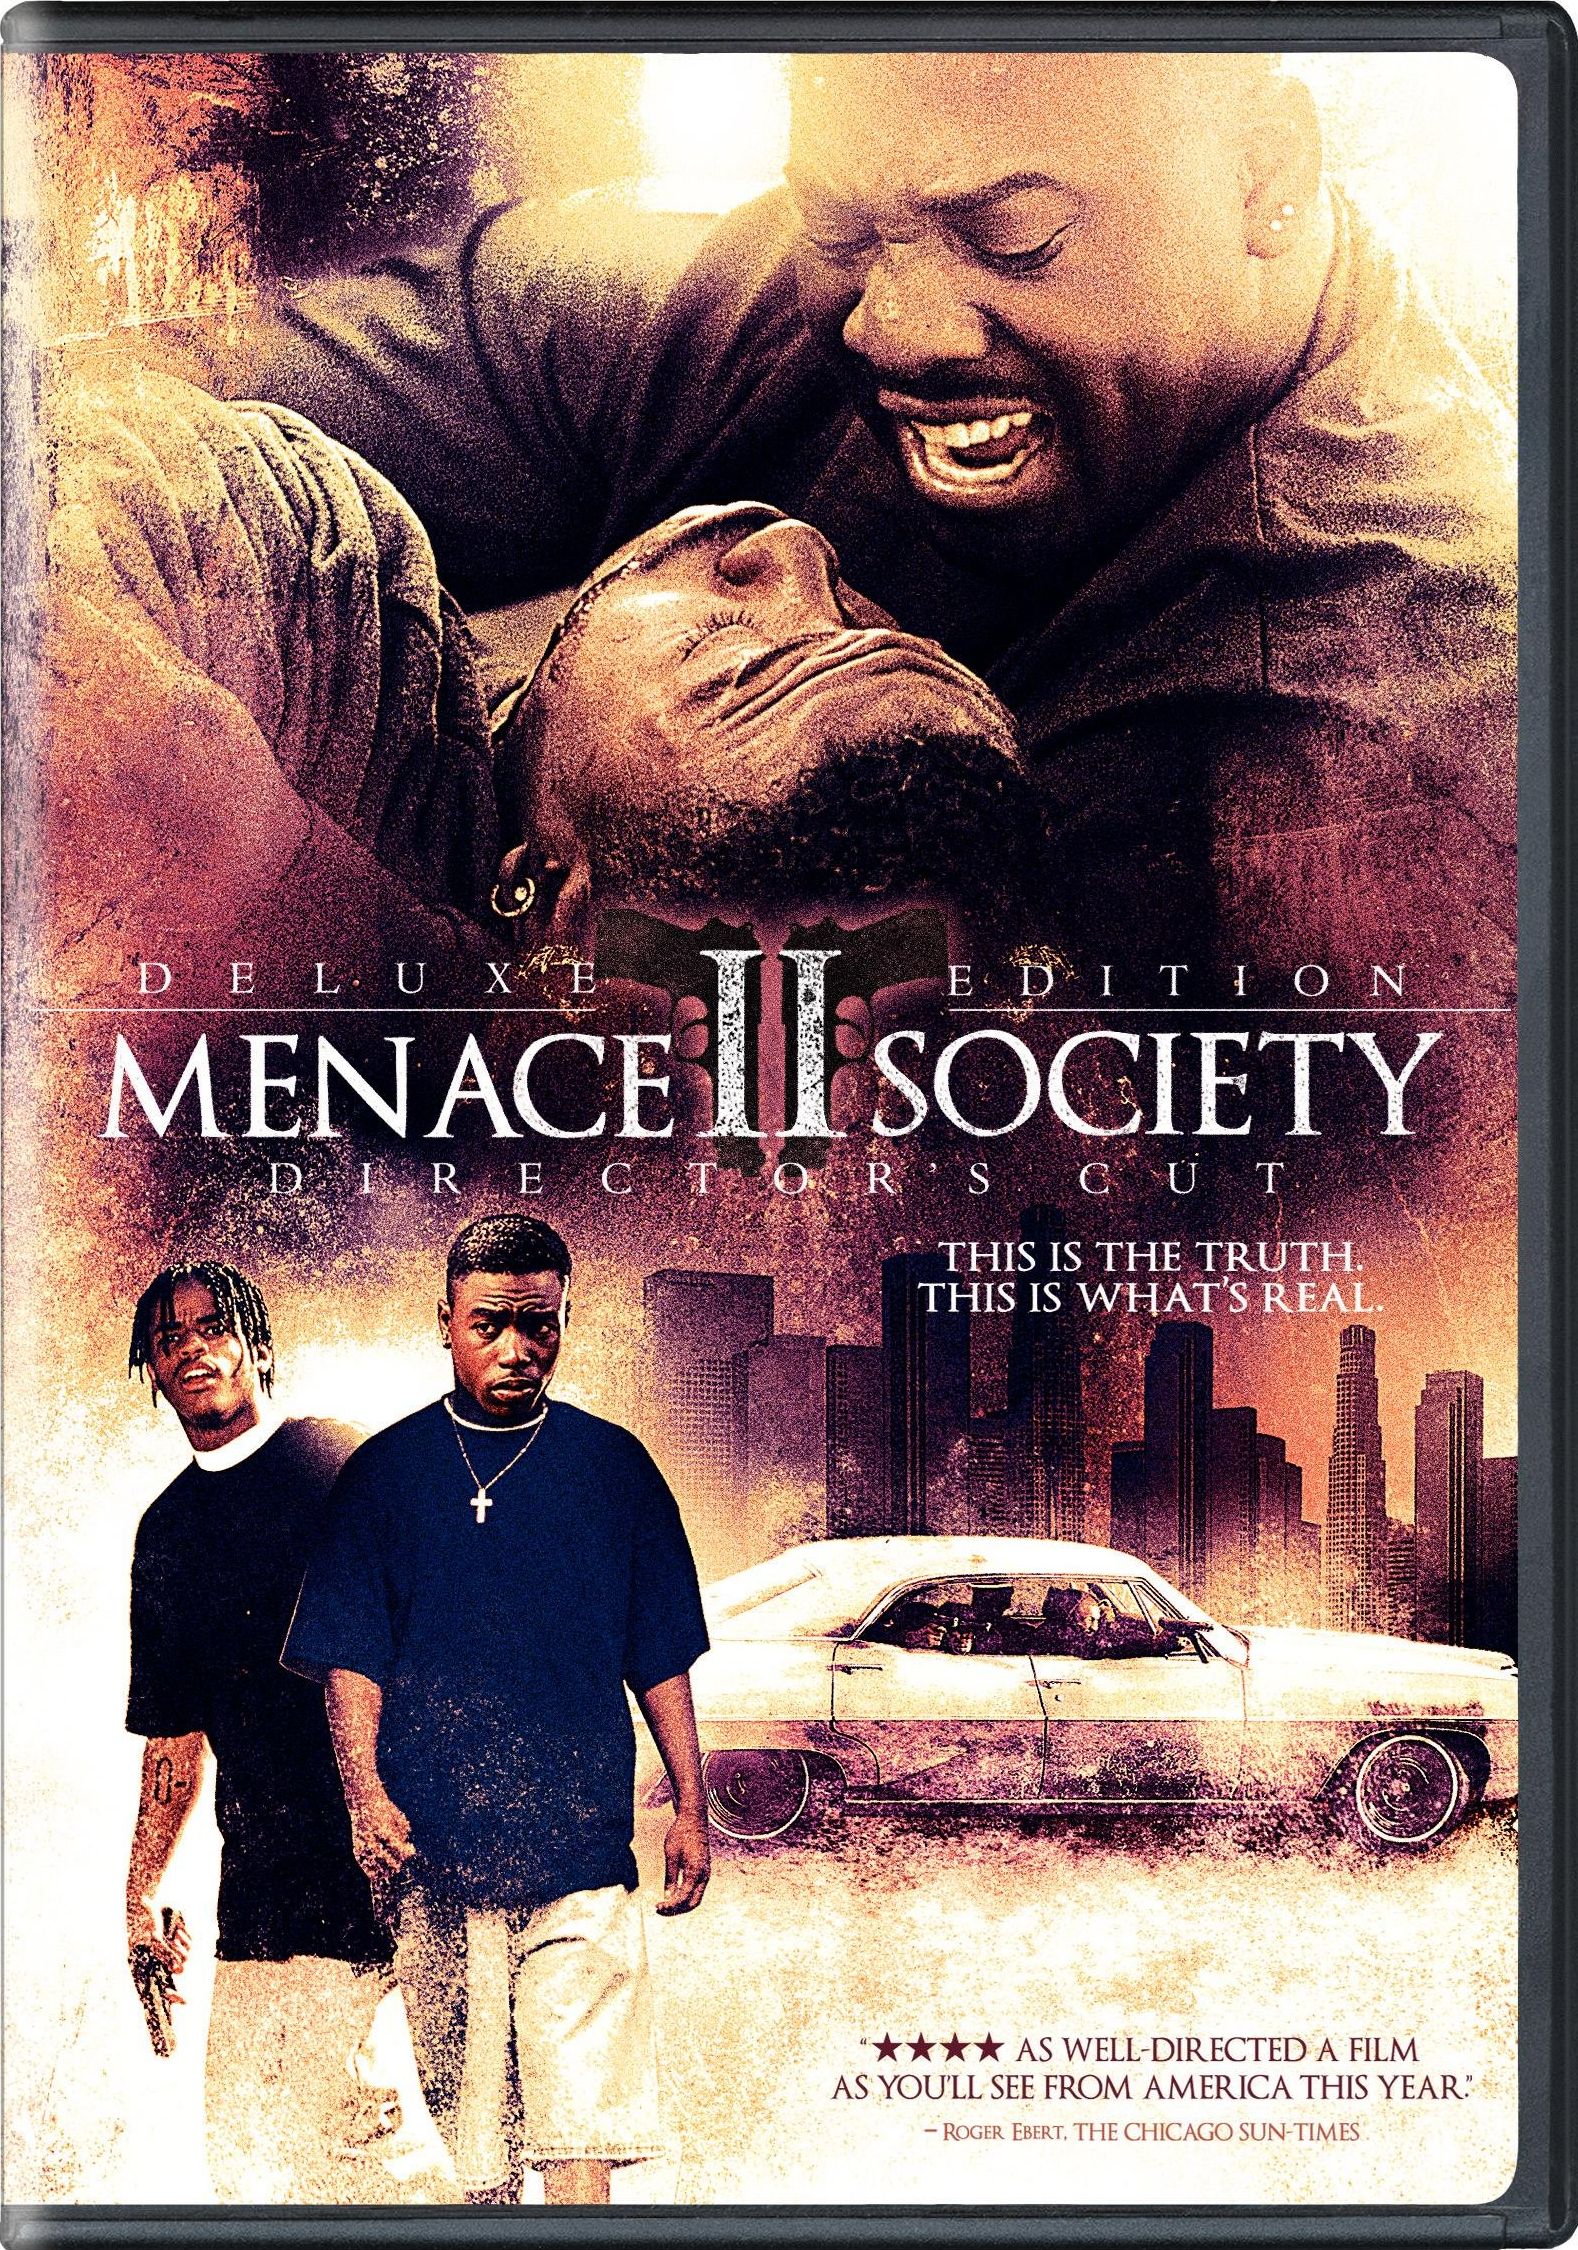 Why Was Caine Sick In Menace To Society